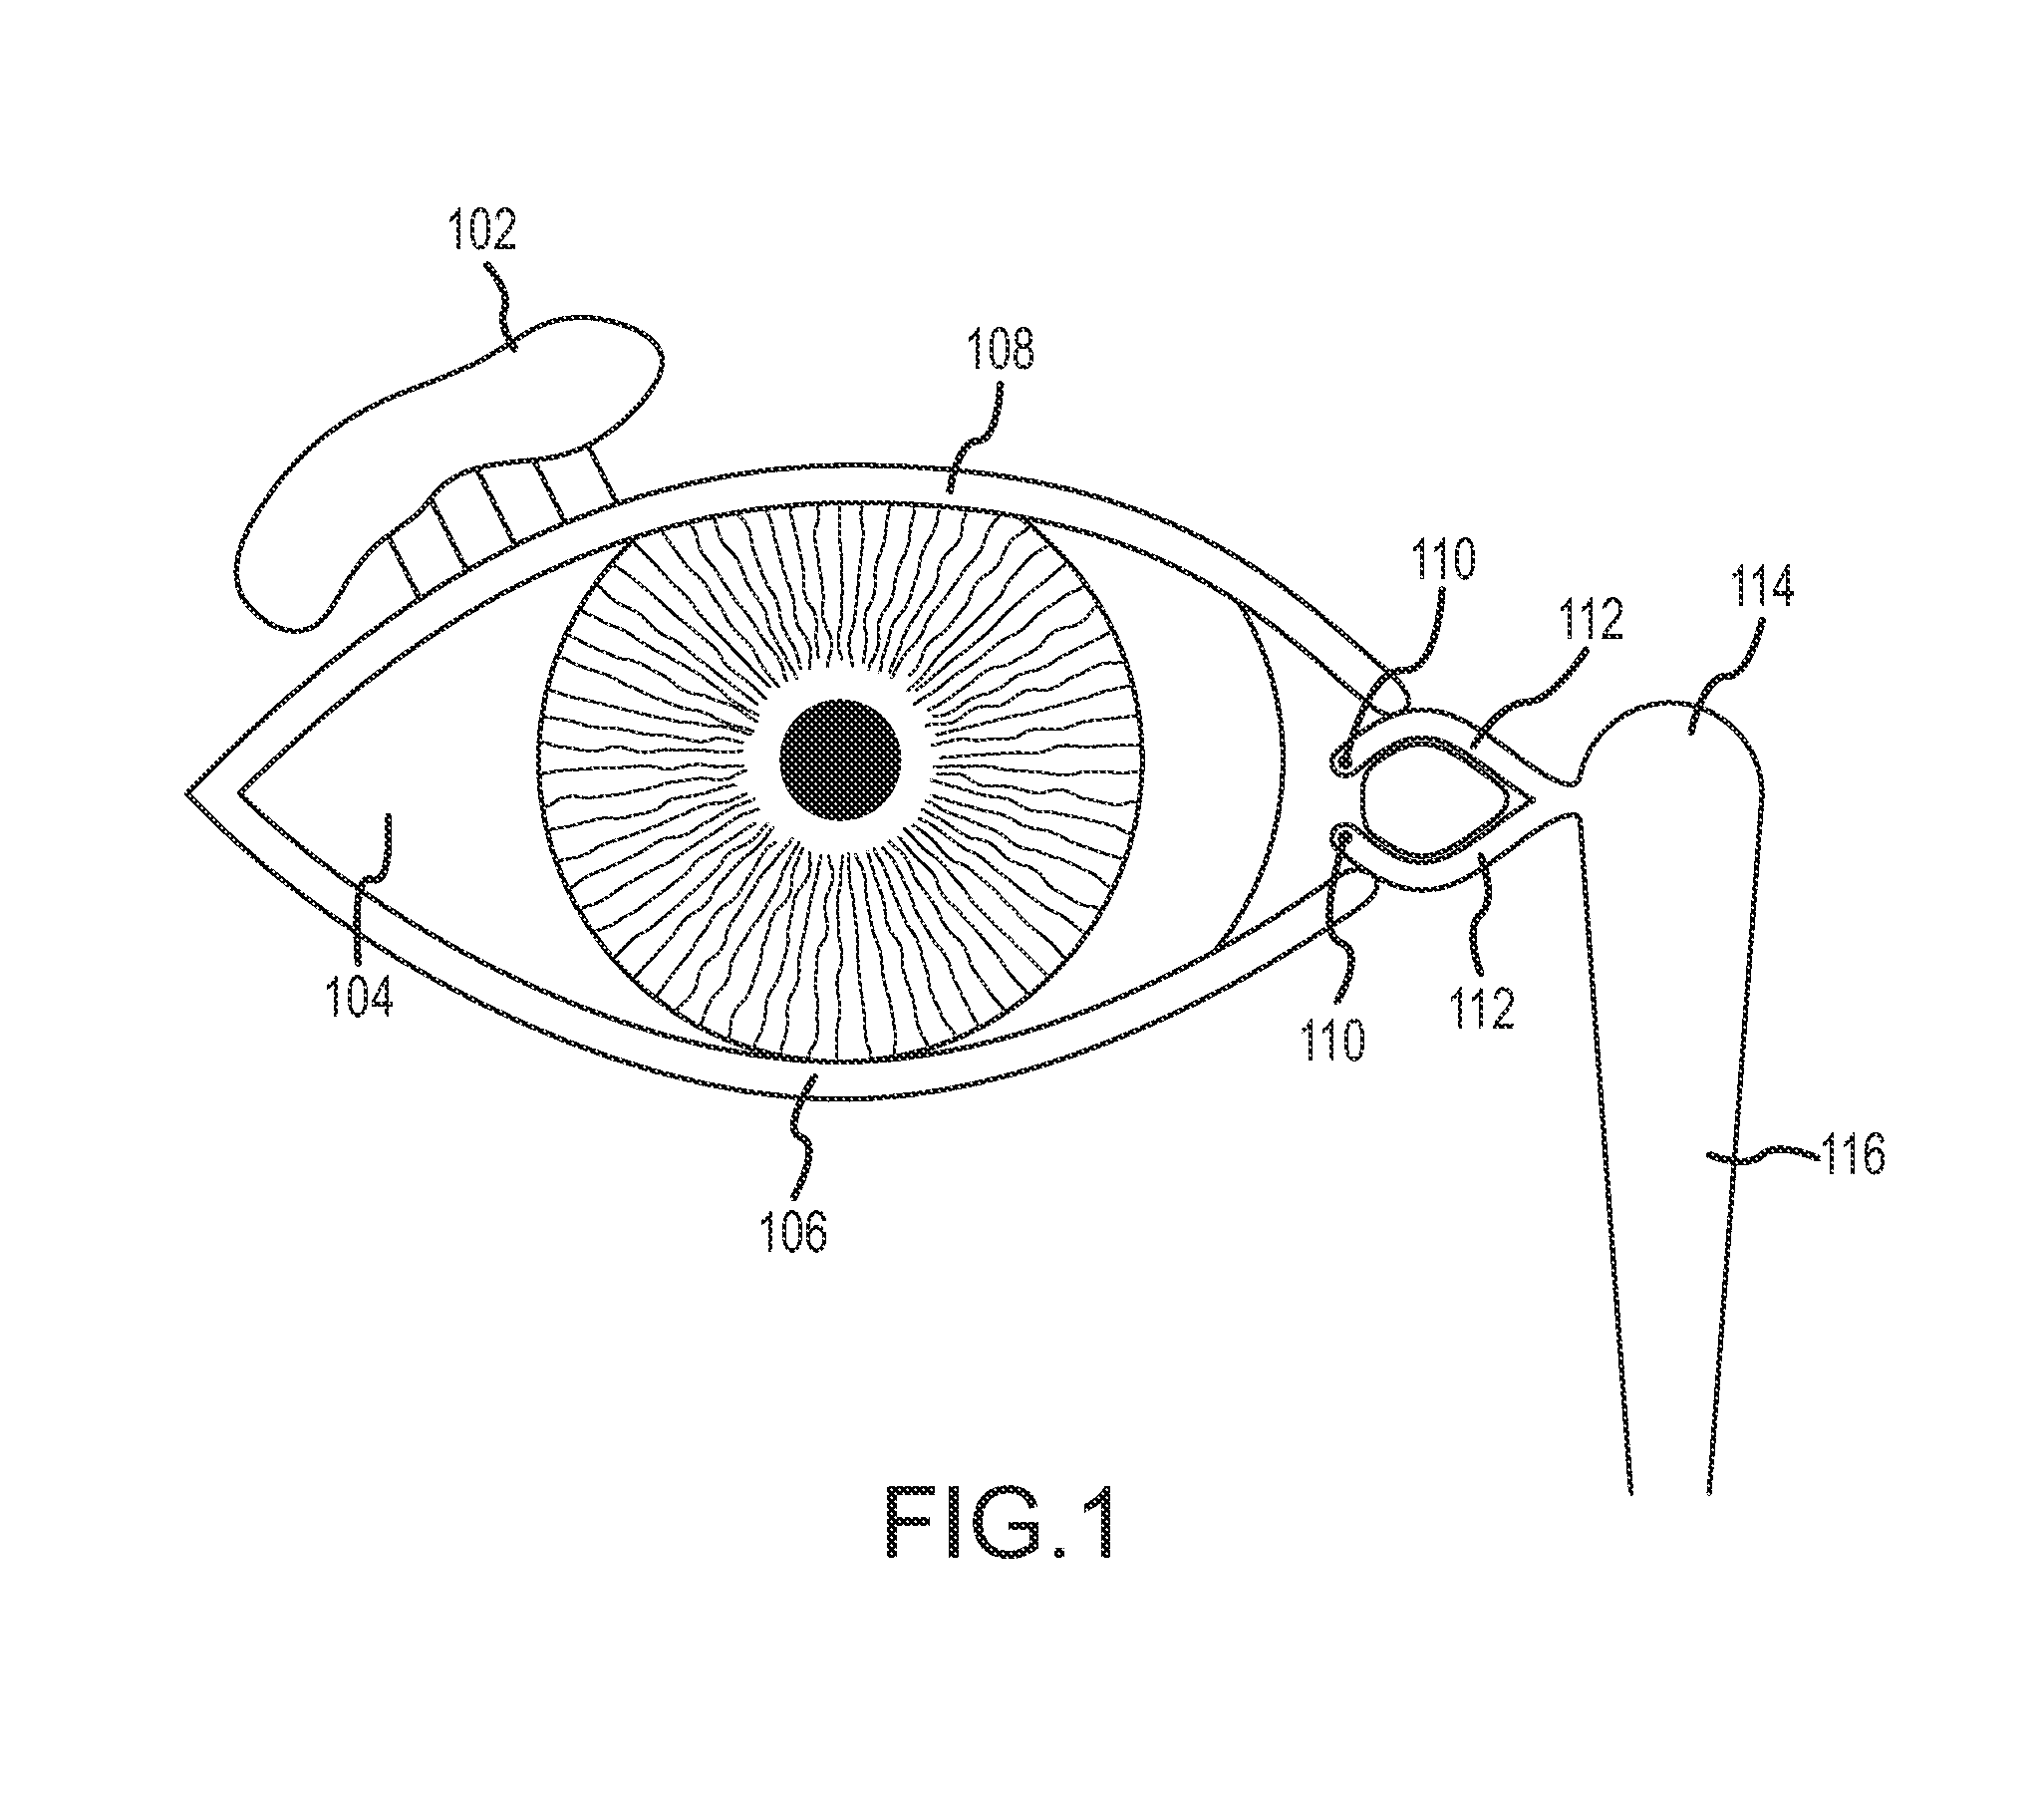 Implant device, tool, and methods relating to treatment of paranasal sinuses